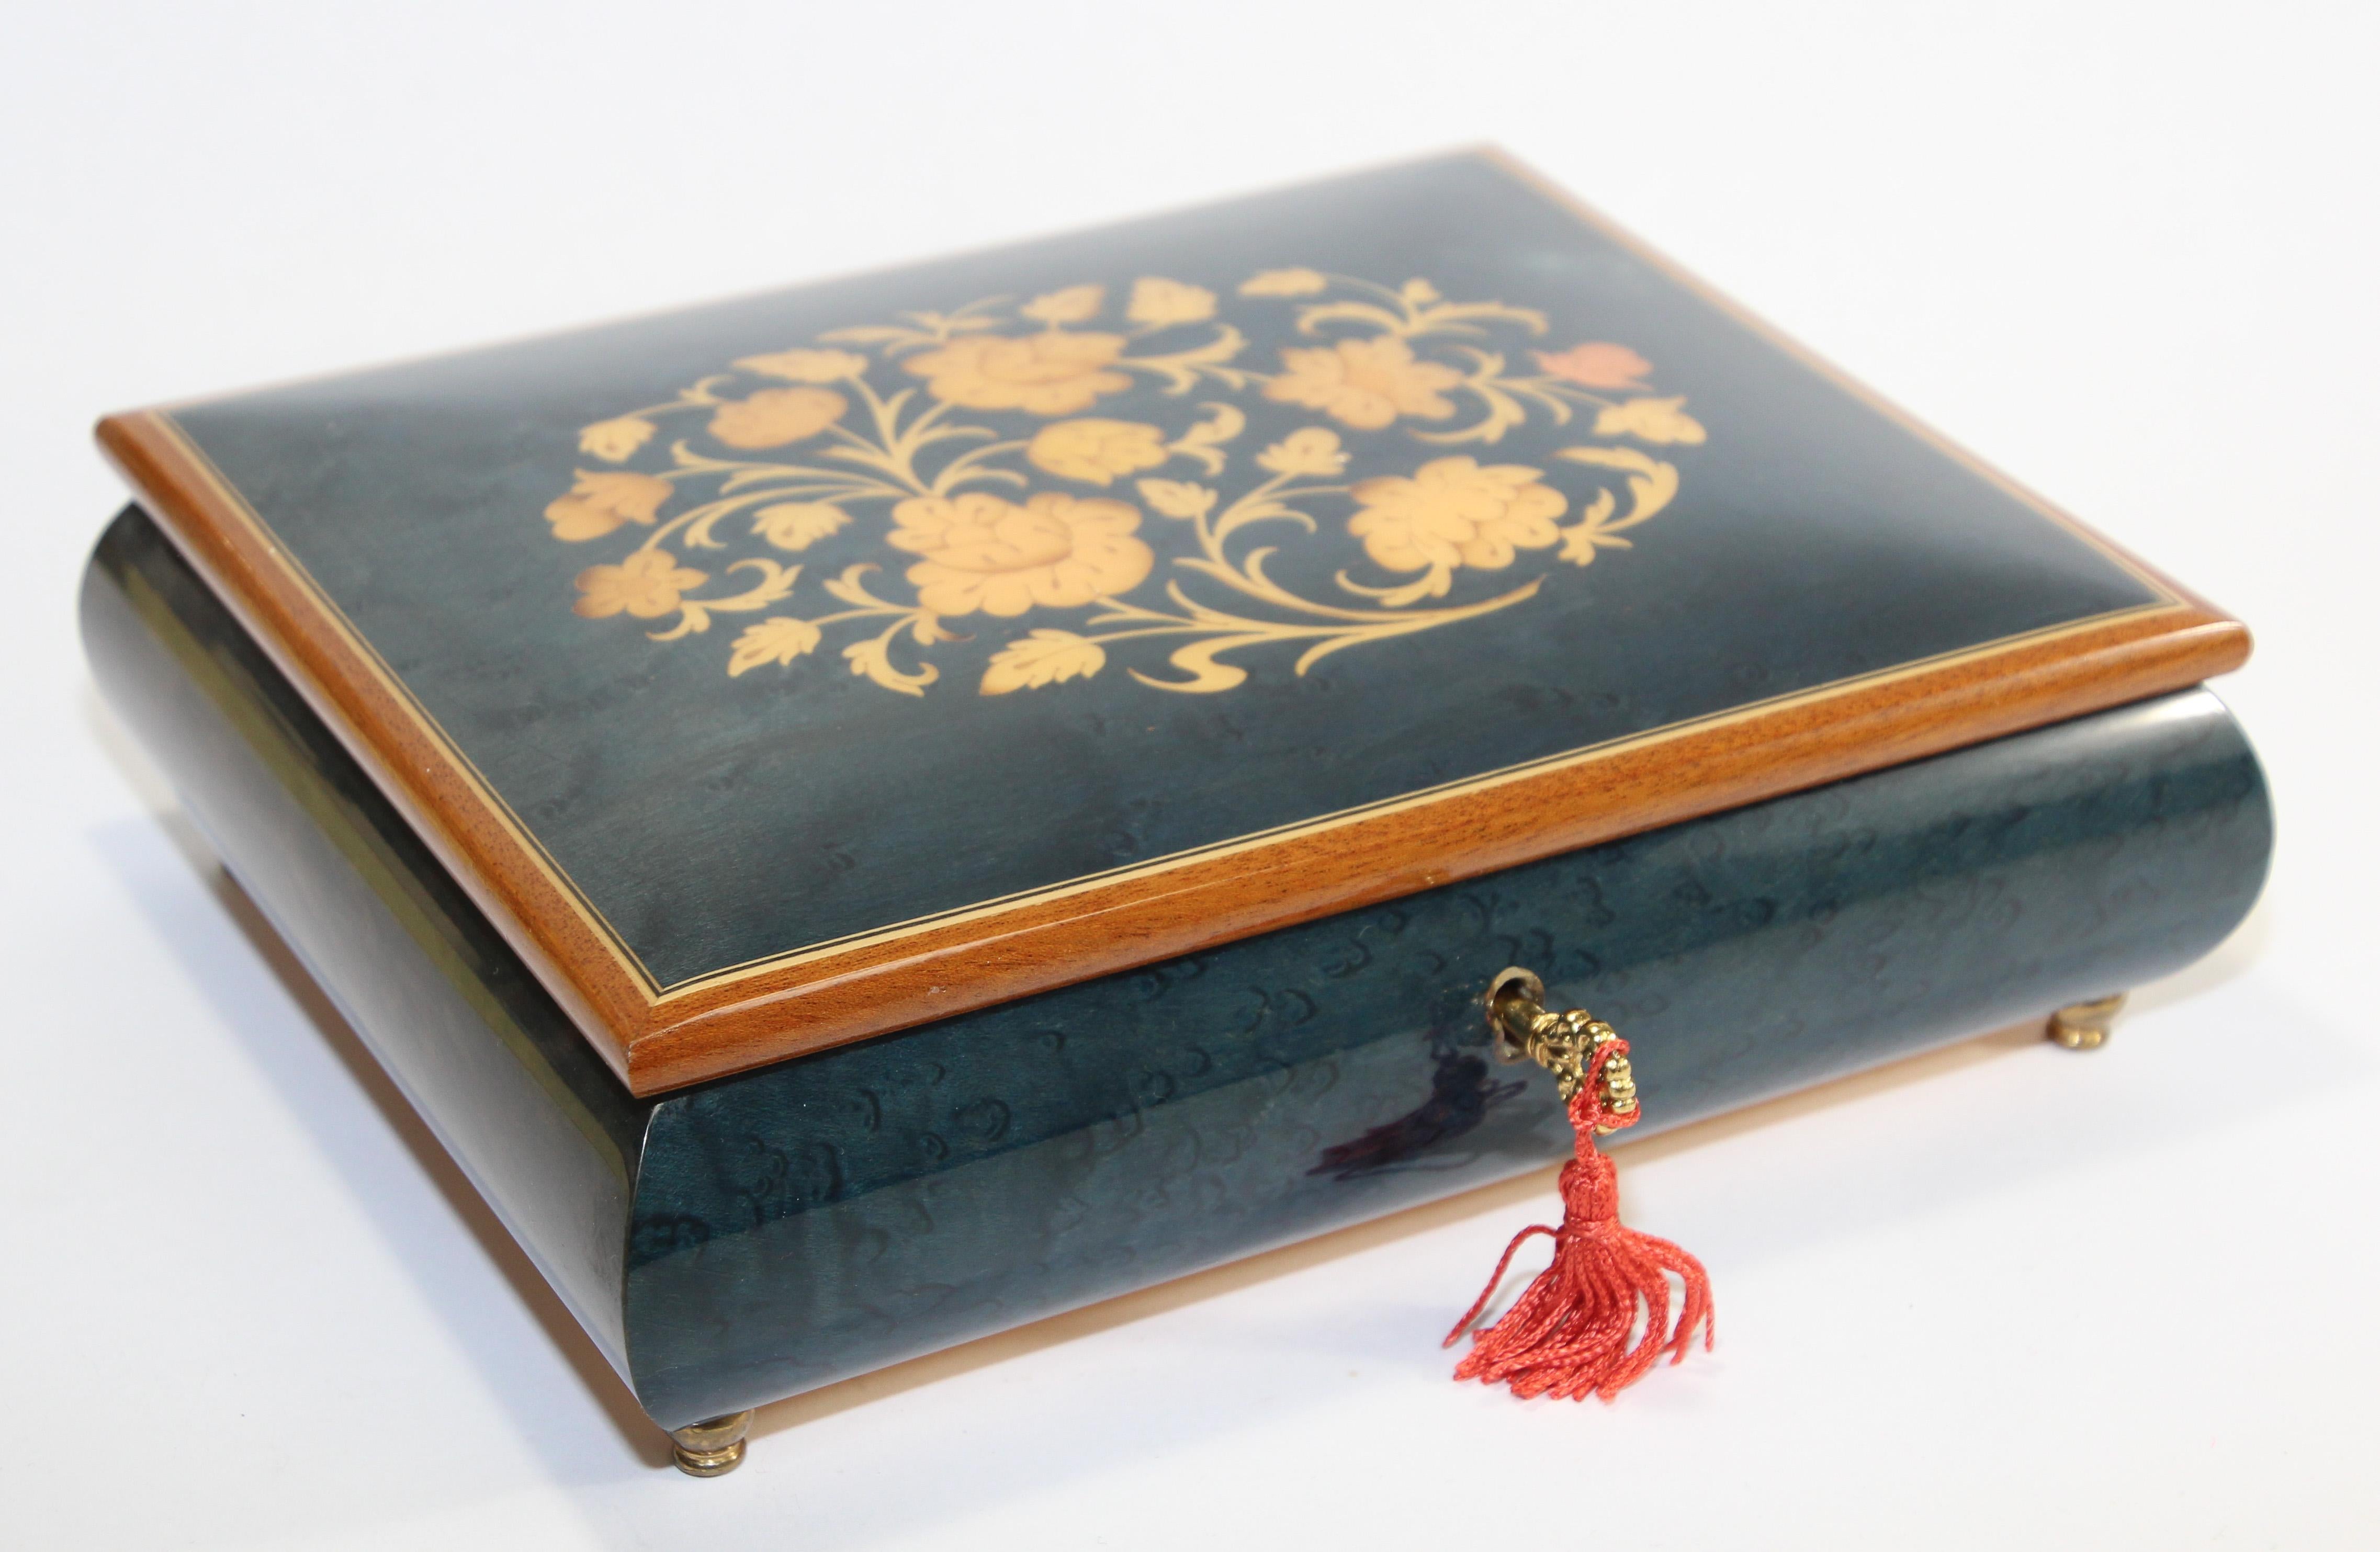 Elegant large handcrafted footed wooden music box in thuya wood hand painted.
Thuya tree is famous for rich gold and brown shades of its grain and unique exotic fragrance, similar to cedar.
Lined in red velve, original key with tassel.
Hand painted